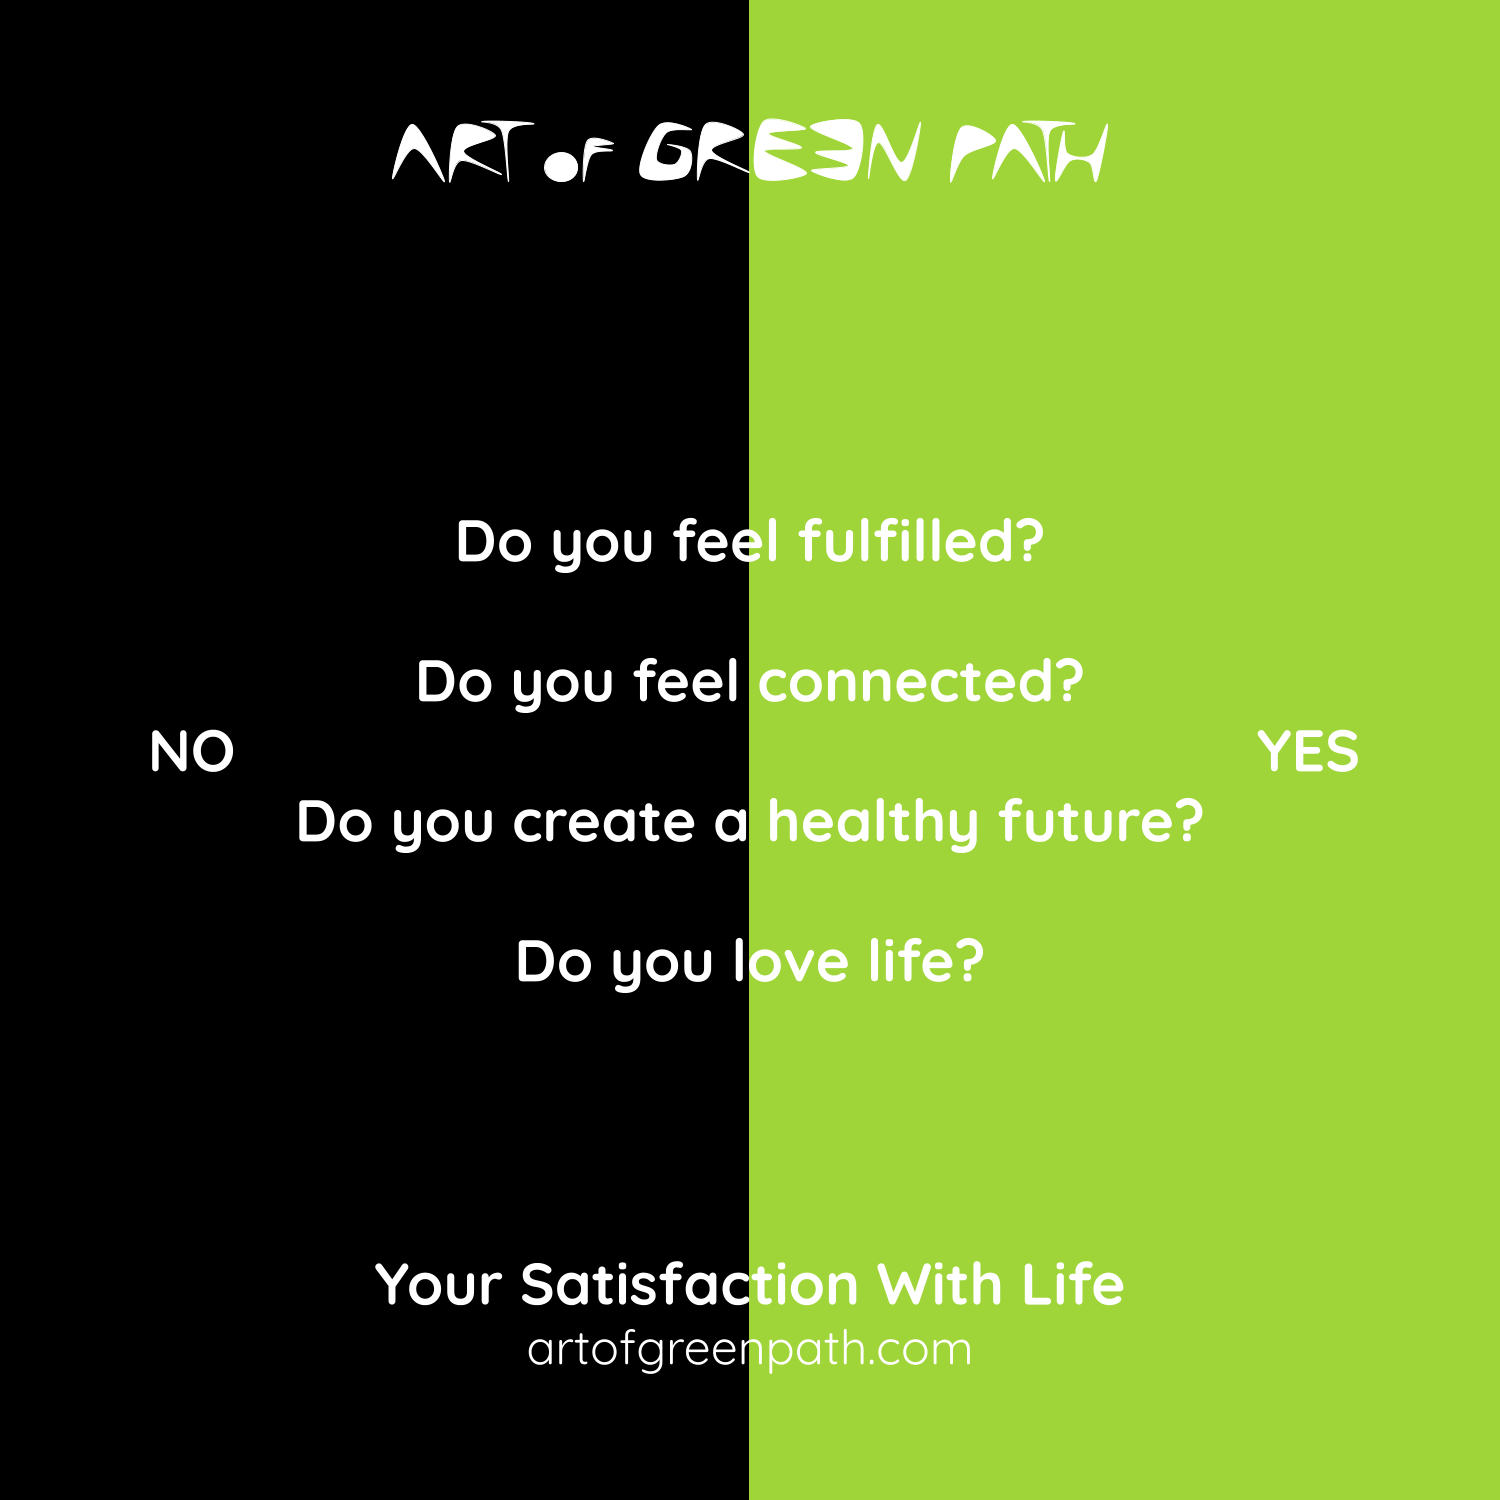 Art Of Green Path - Your Satisfaction With Life in 4 Questions